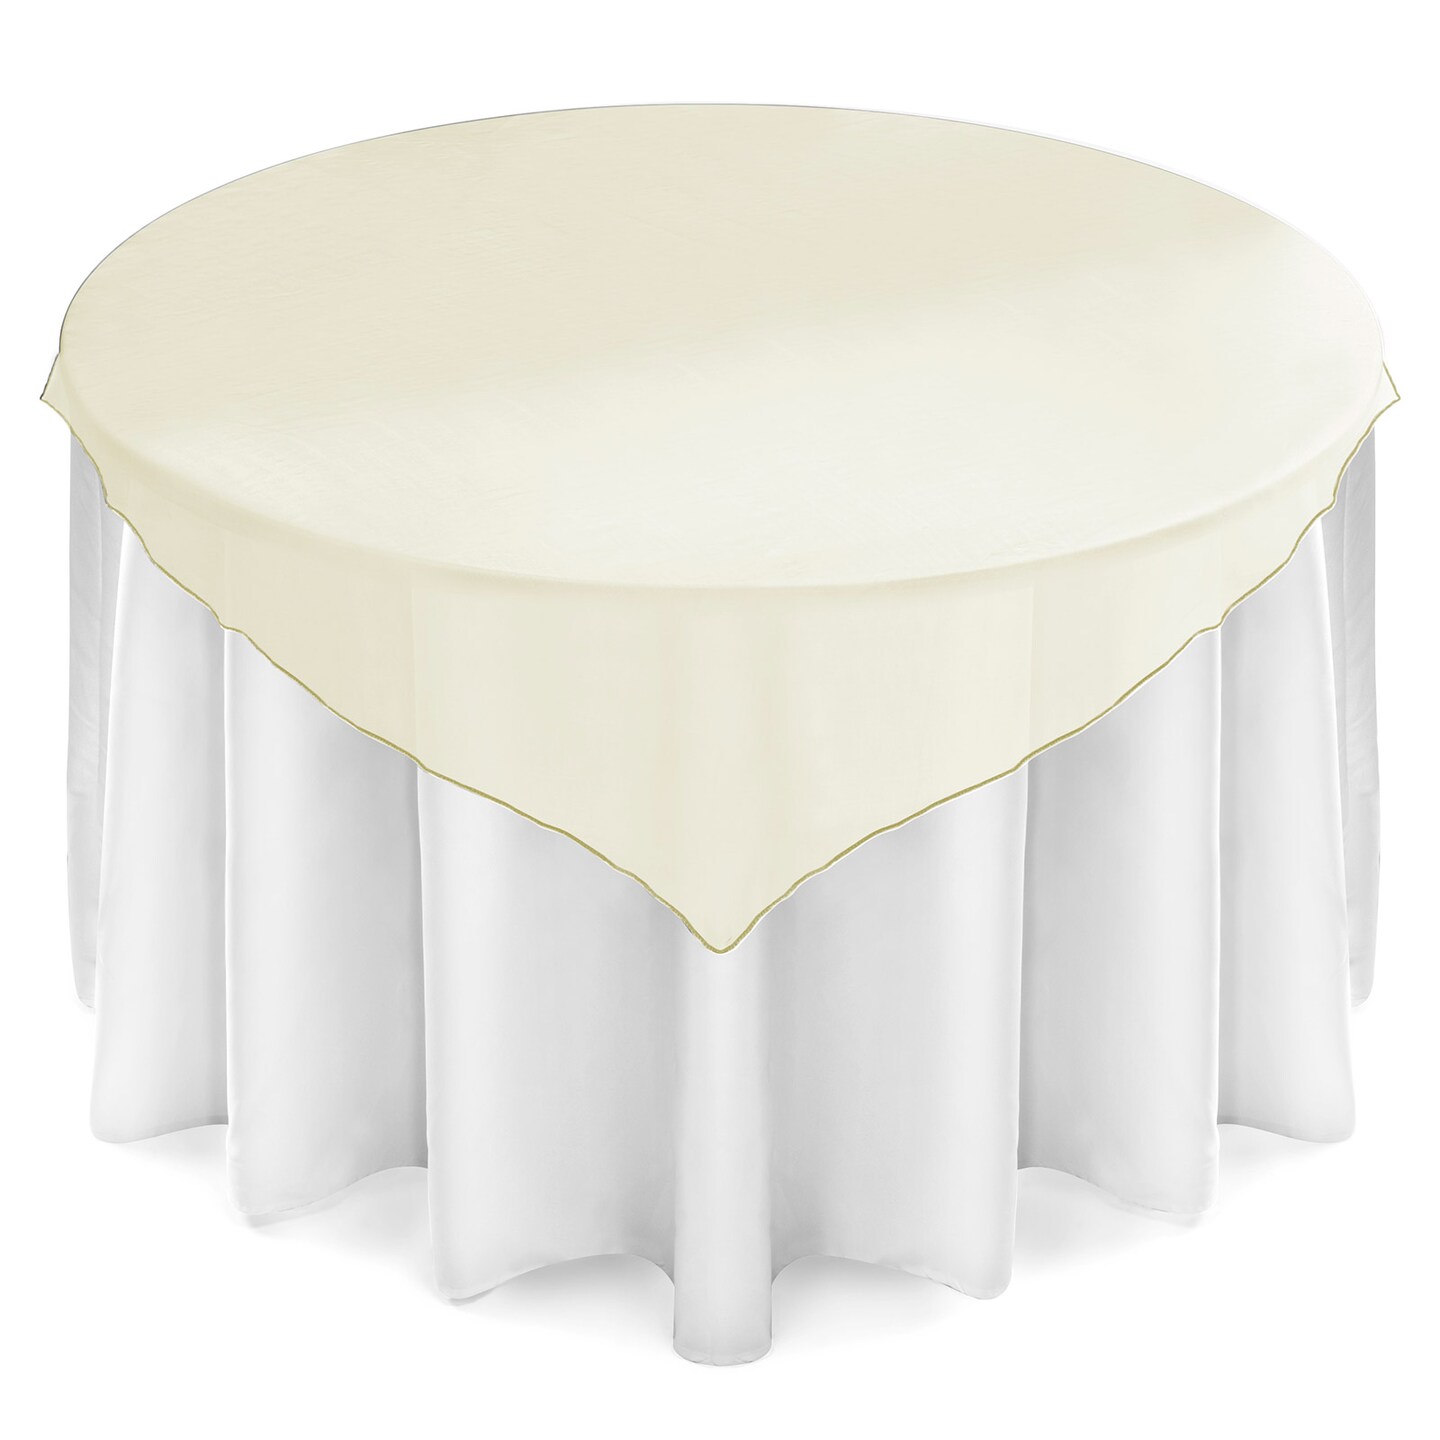 Lann's Linens Organza Wedding Table Overlay - Tablecloth Topper (72" Square)